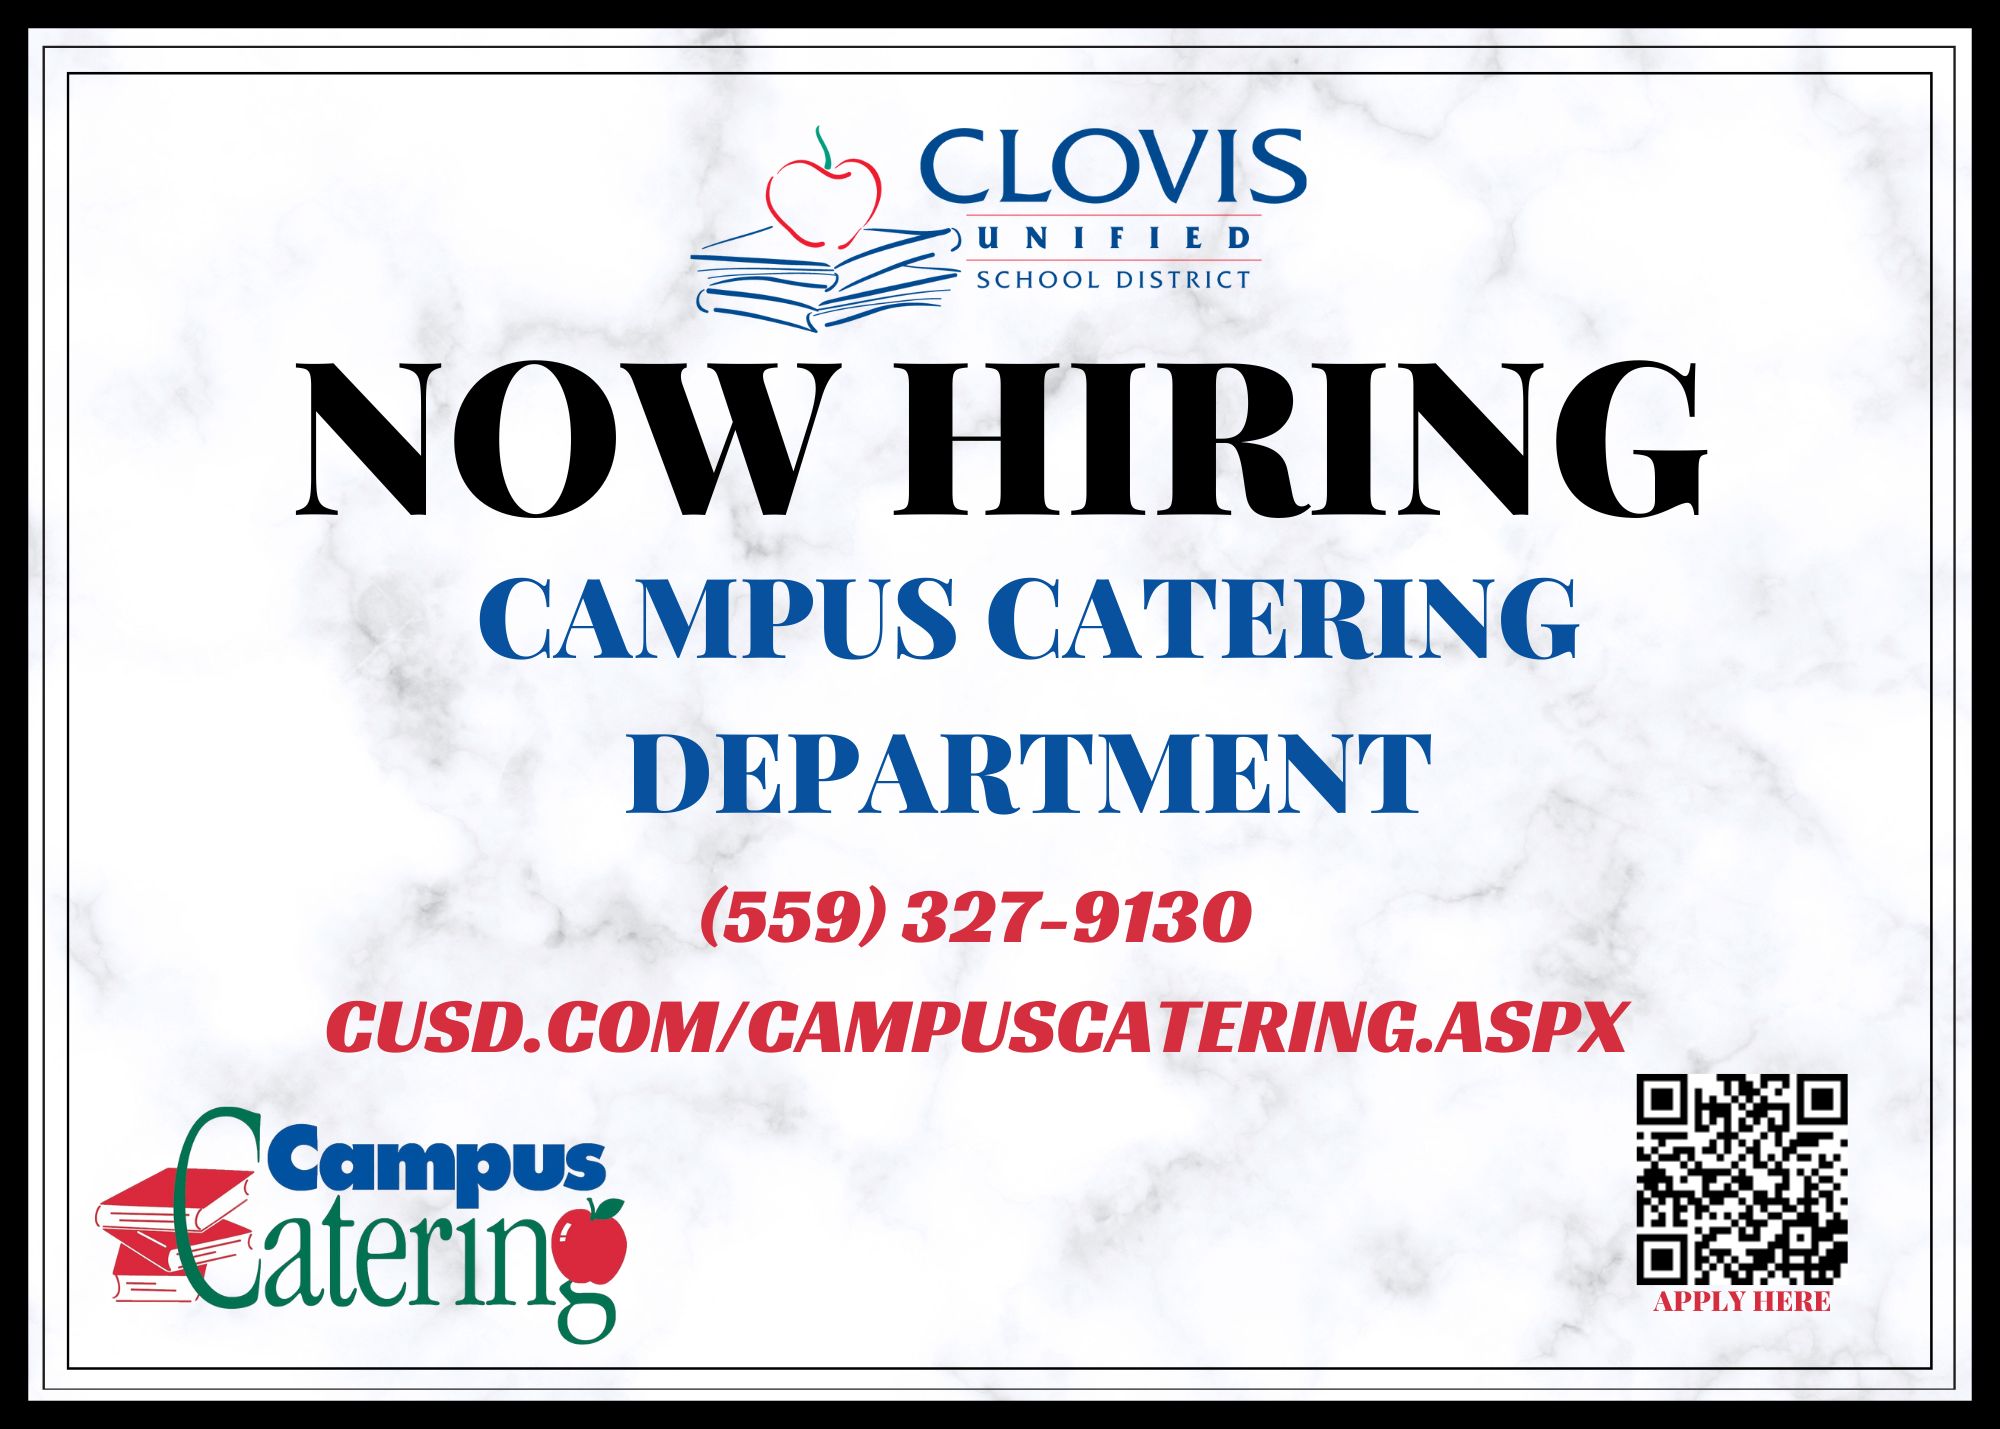 Now Hiring: Campus Catering Department - call 559-327-9130